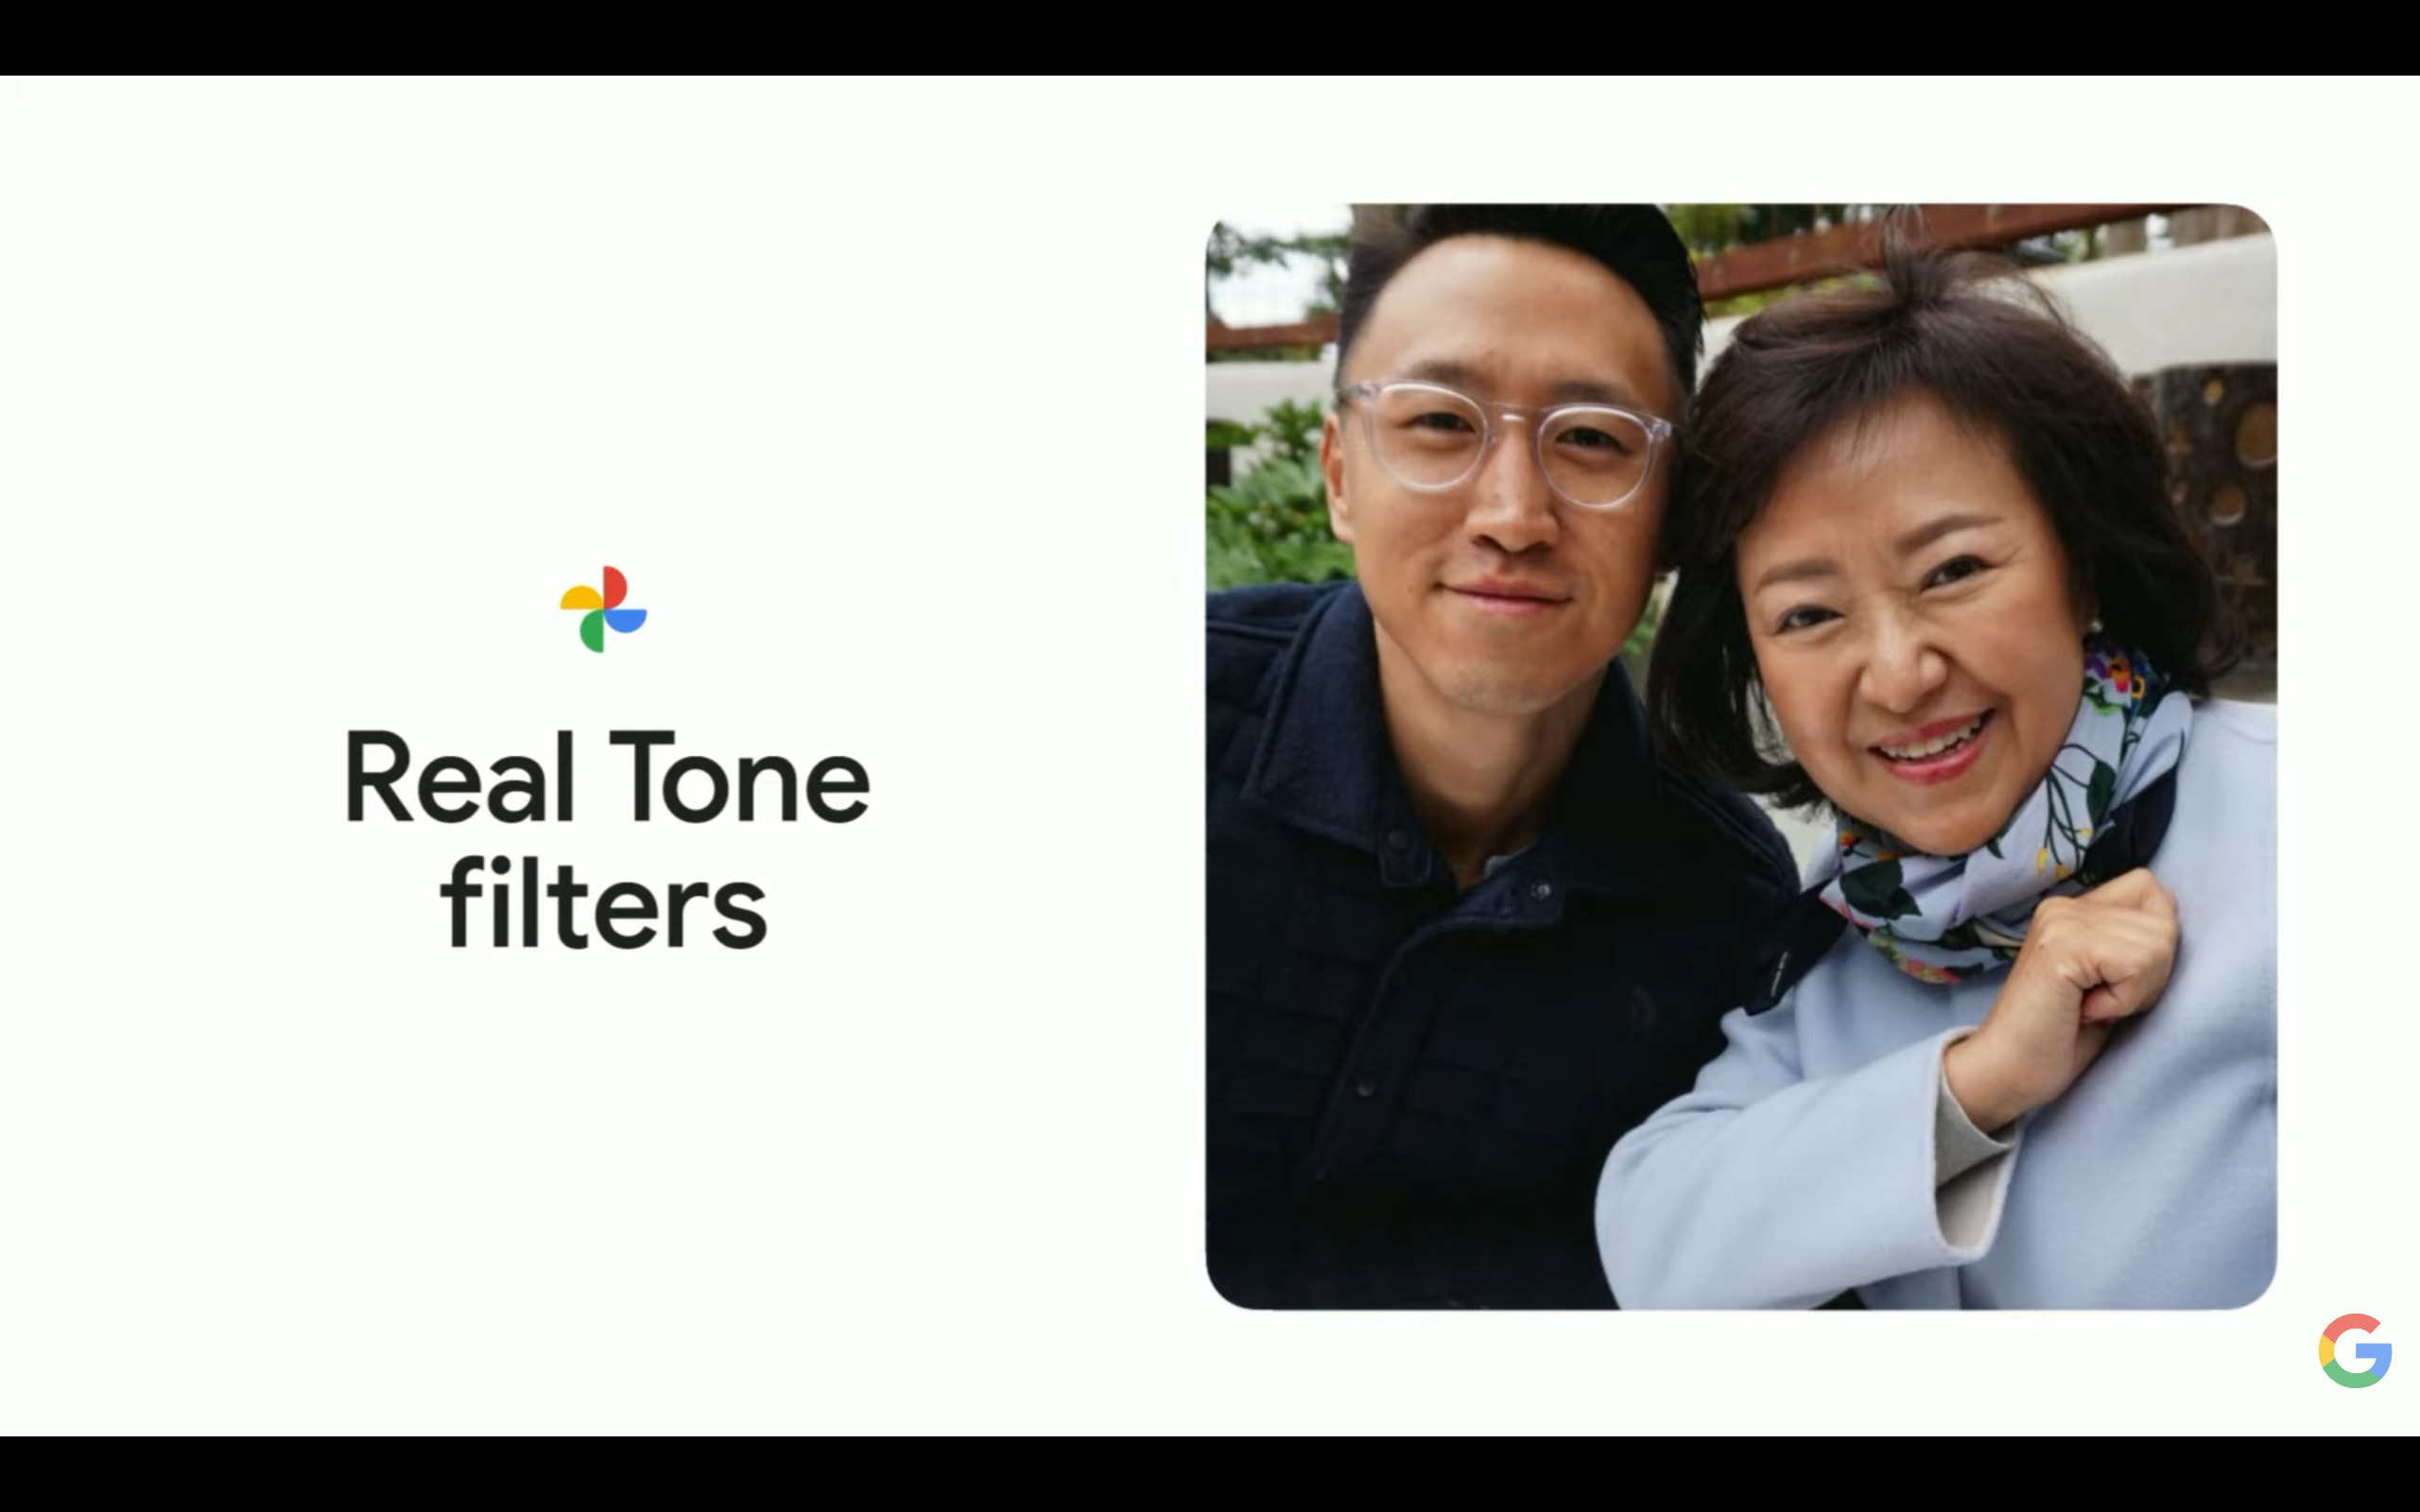 Google begins carrying out its Real Tone channels to Google Photos